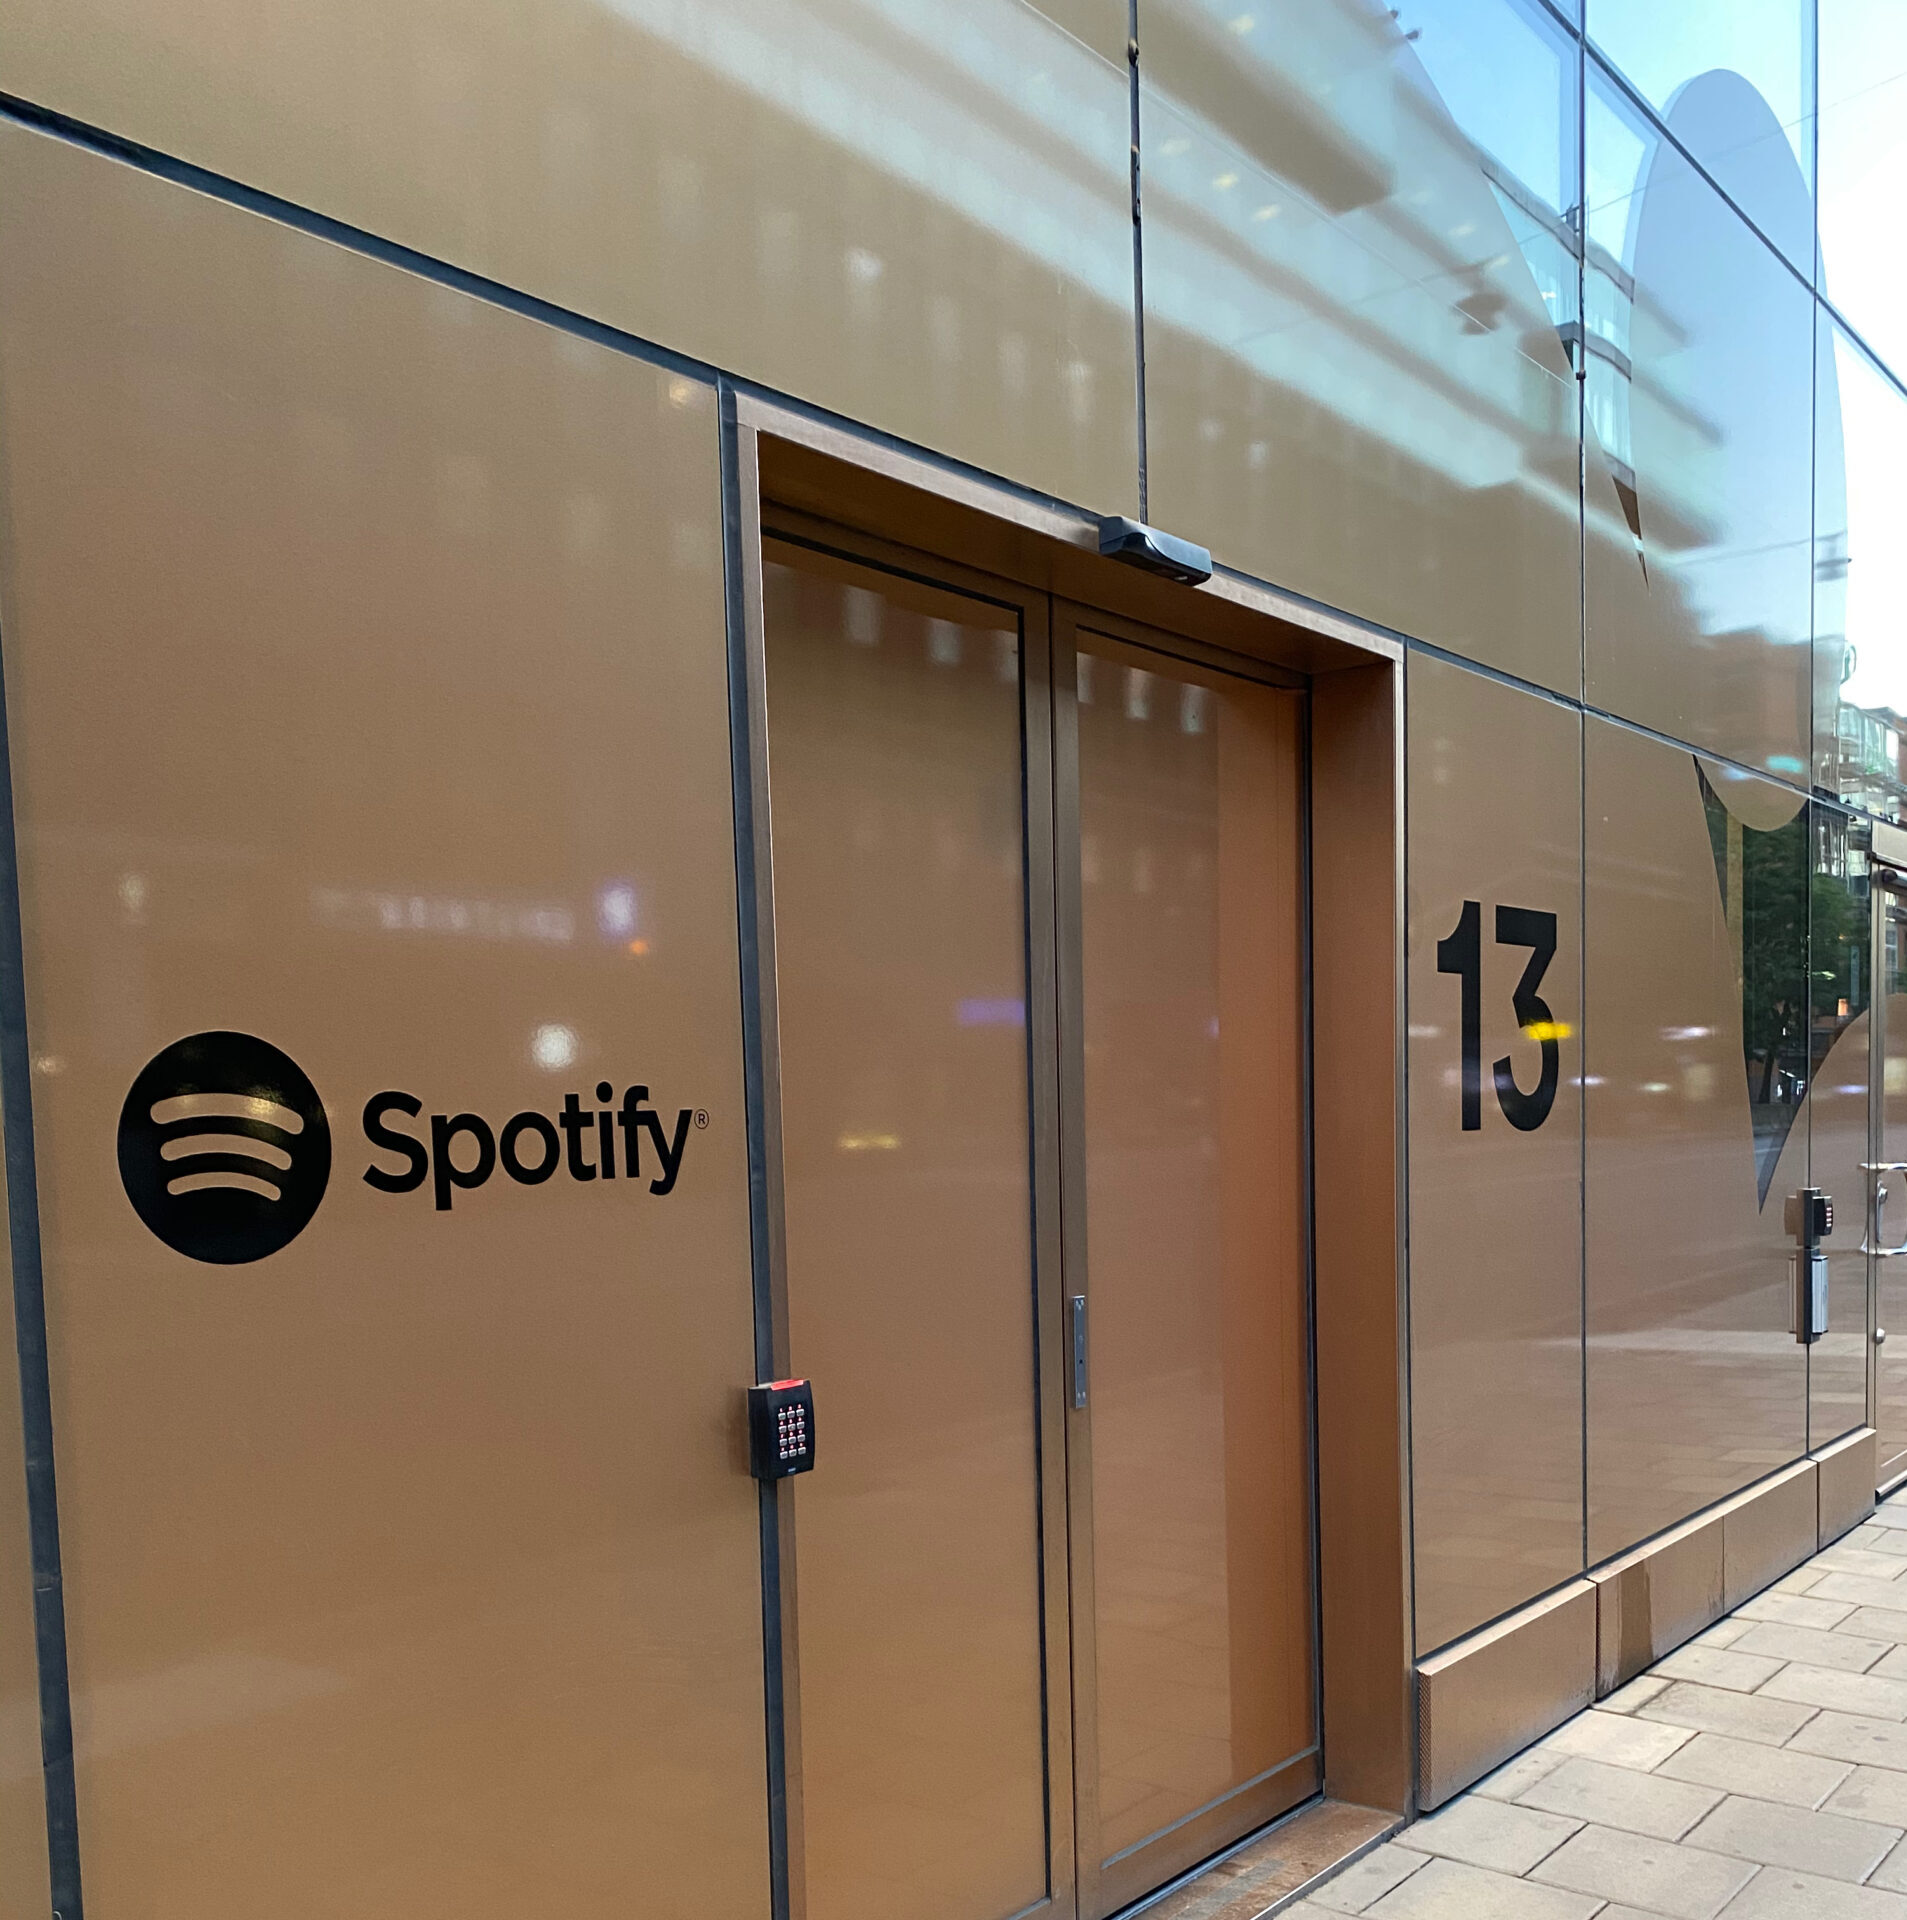 Spotify is one of the most famous unicorns among the Stockholms Startups Scene